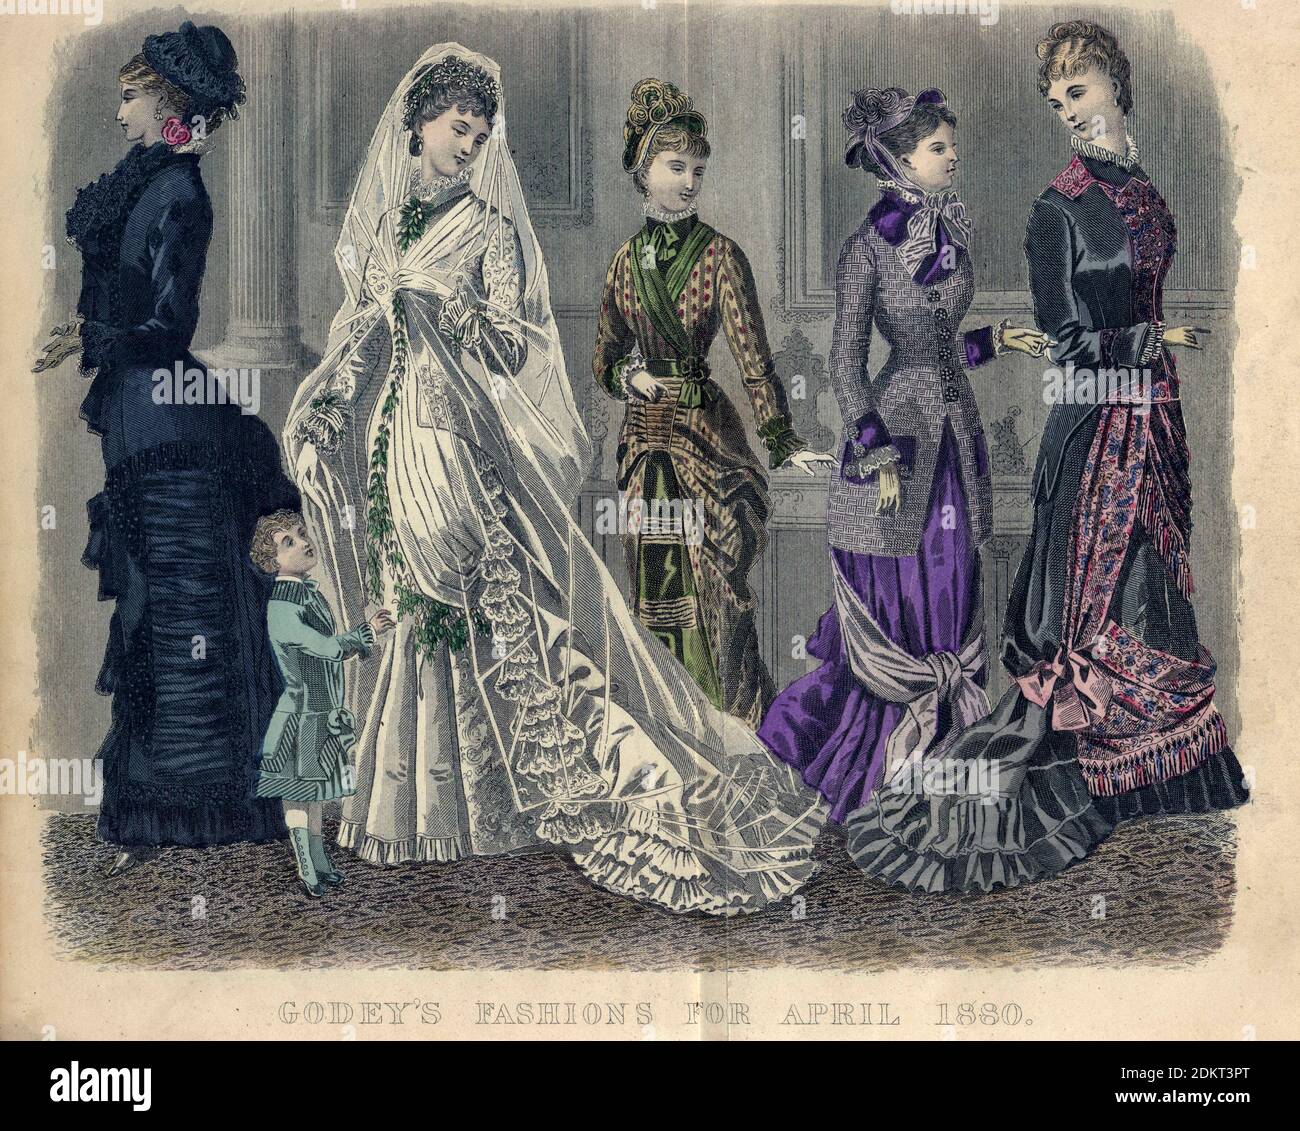 Colour drawing of Godey's women's Fashion for April 1880 from Godey's Lady's Book and Magazine, 1880 Philadelphia, Louis A. Godey, Sarah Josepha Hale, Stock Photo